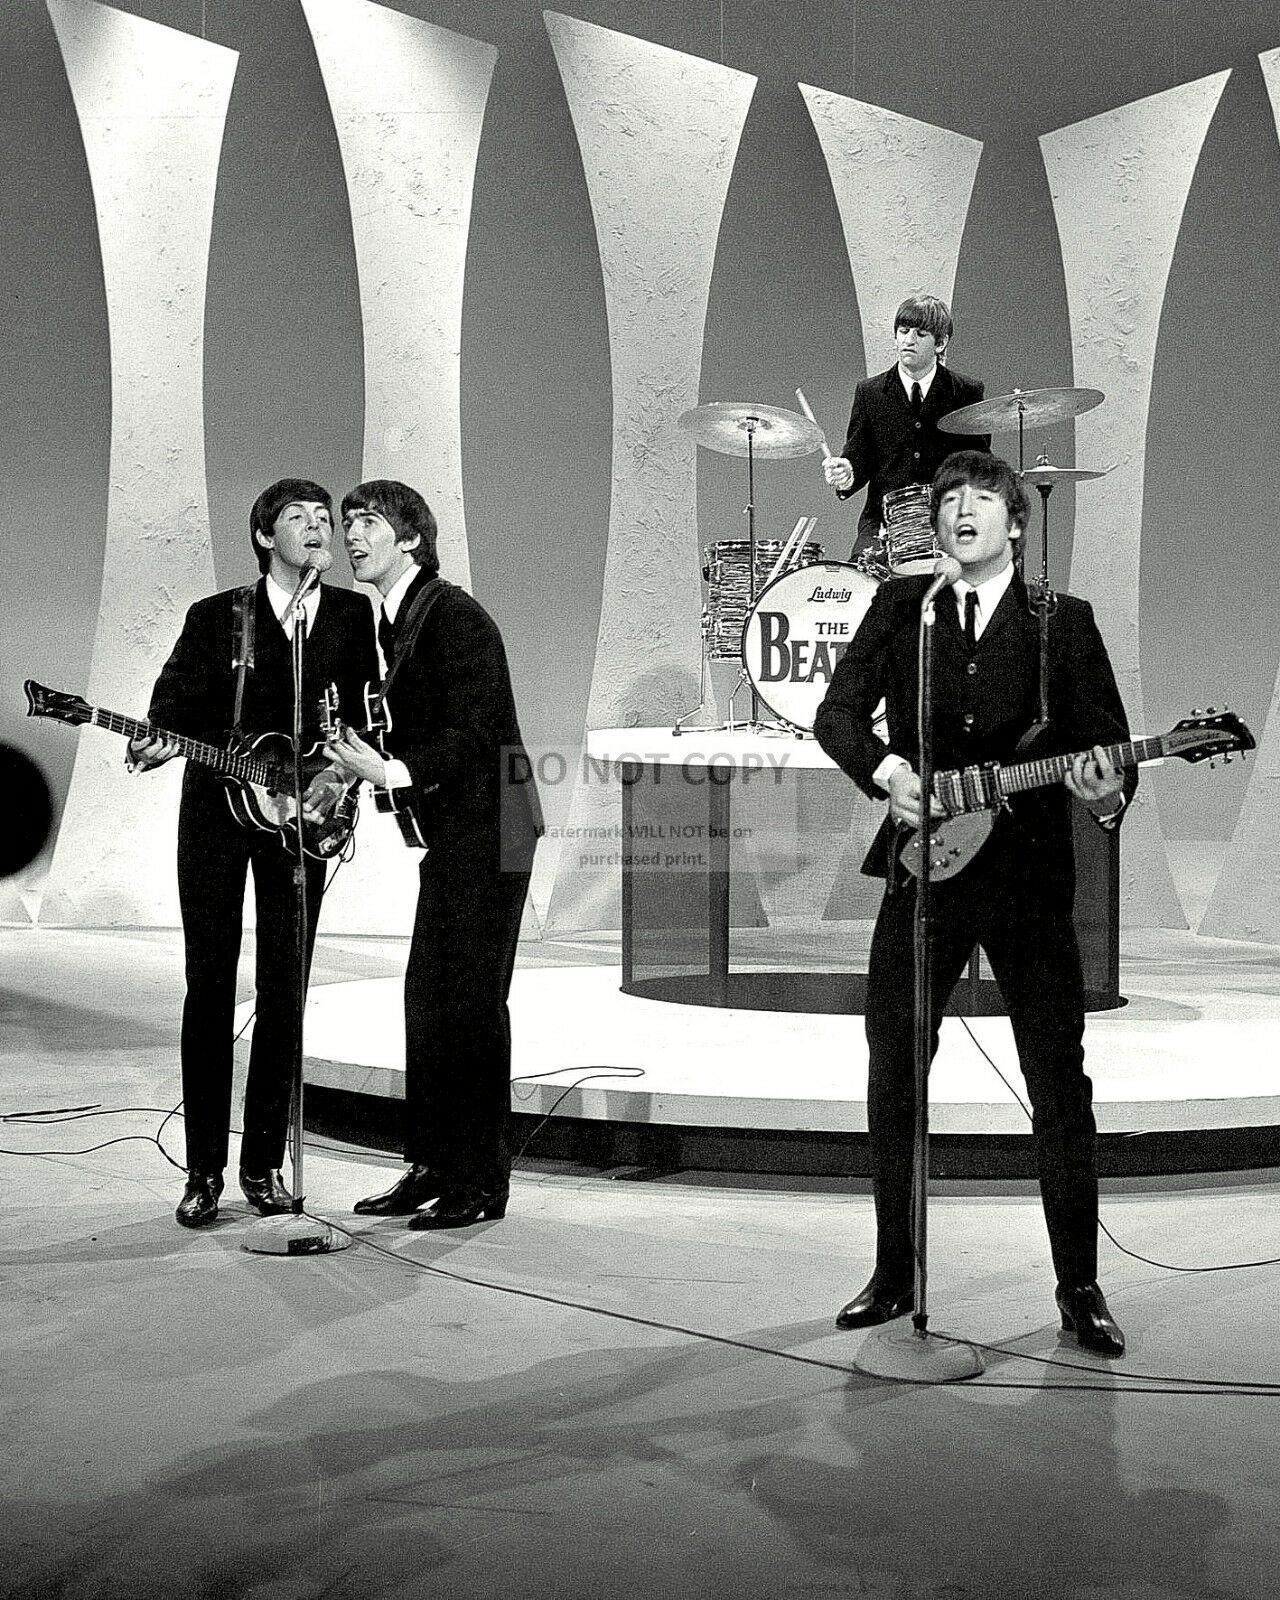 The Beatles Perform On "the Ed Sullivan Show" In 1964 - 8x10 Photo (zz-044)